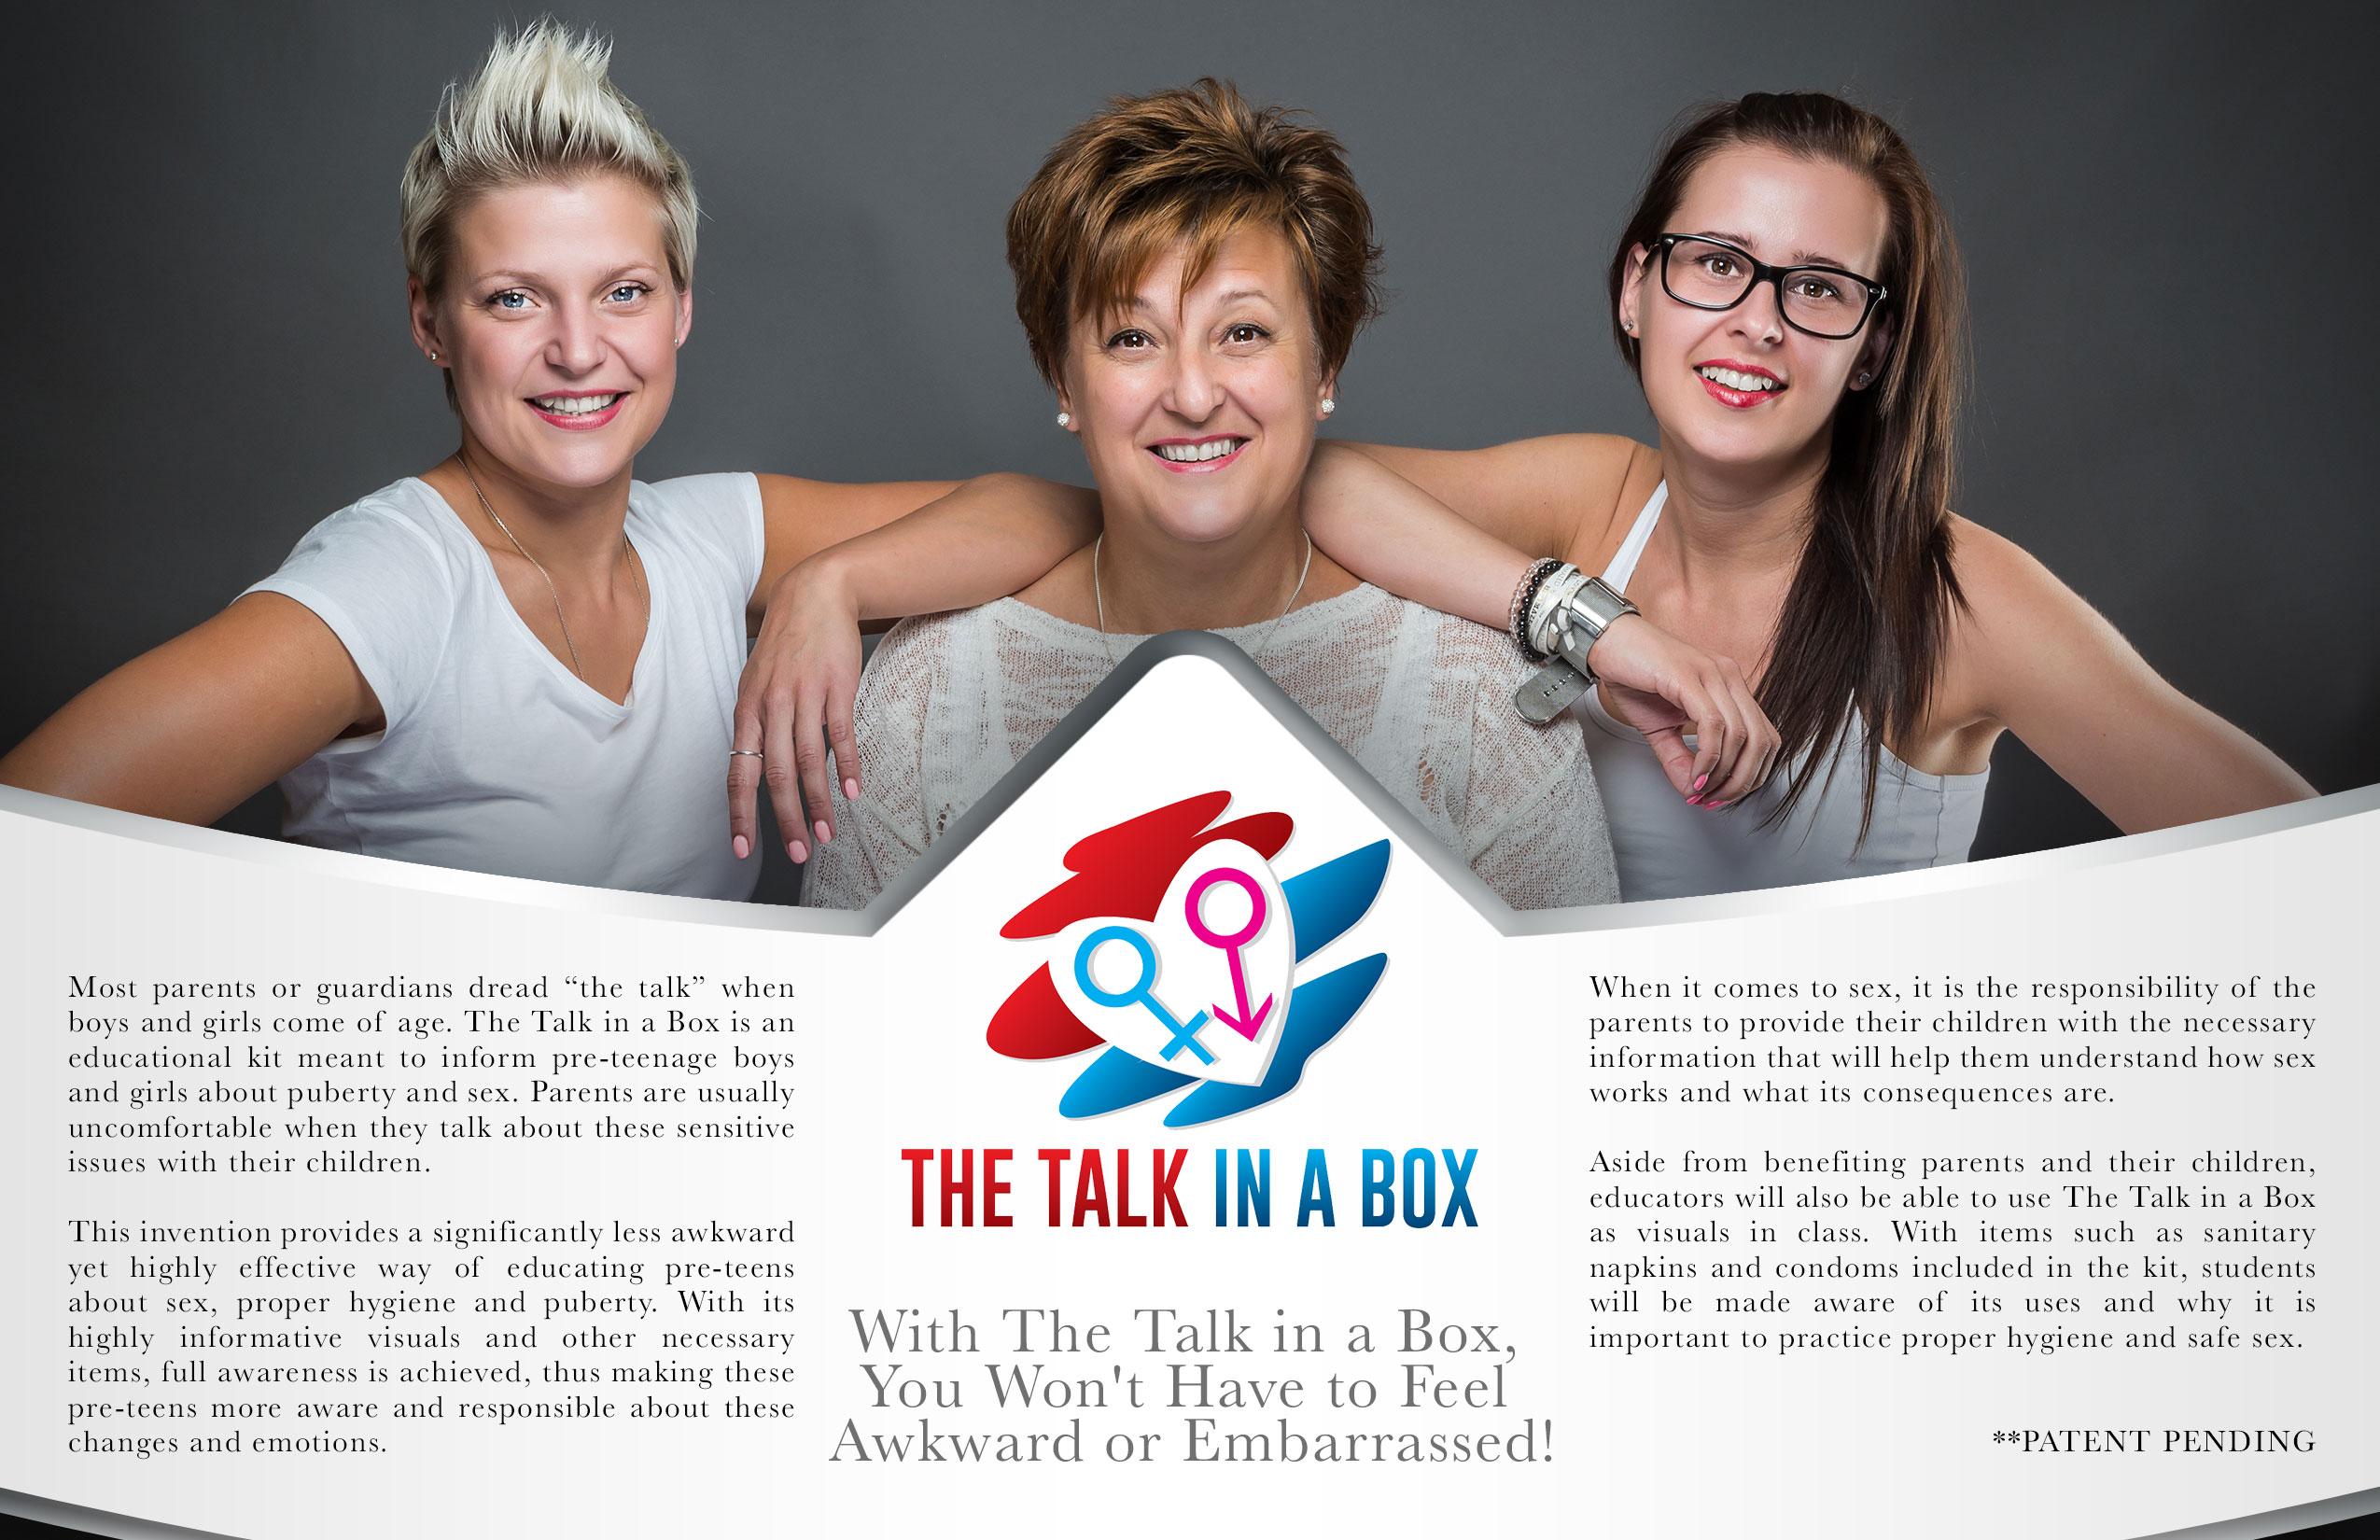 The Talk in a Box is an education invention which teaches pre-teens about topics on puberty and sex.